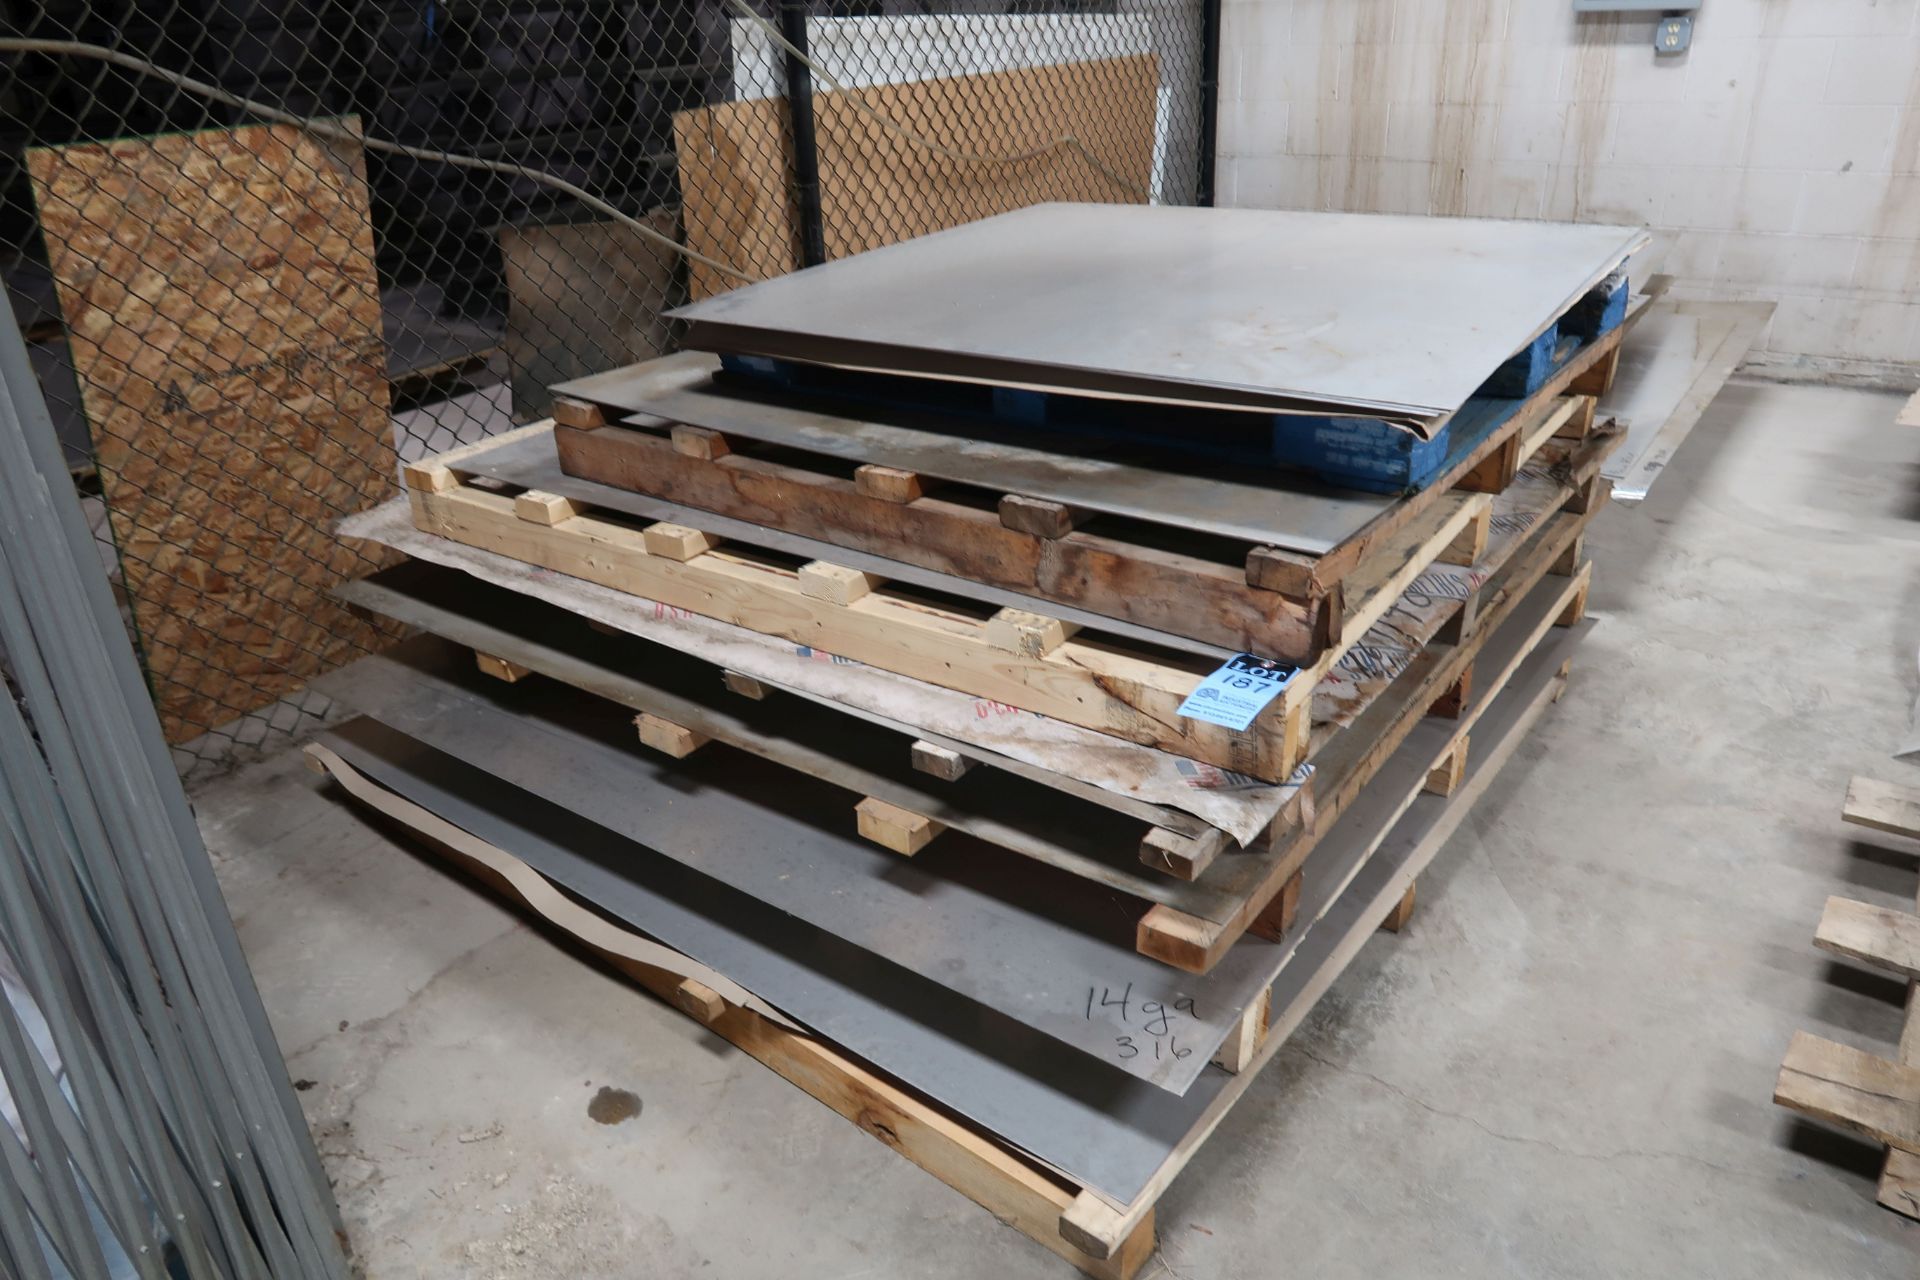 (LOT) (9) TOTAL MISCELLANEOUS SIZE STAINLESS STEEL SHEETS - (3) PIECES 438" X 48" X 14 GA